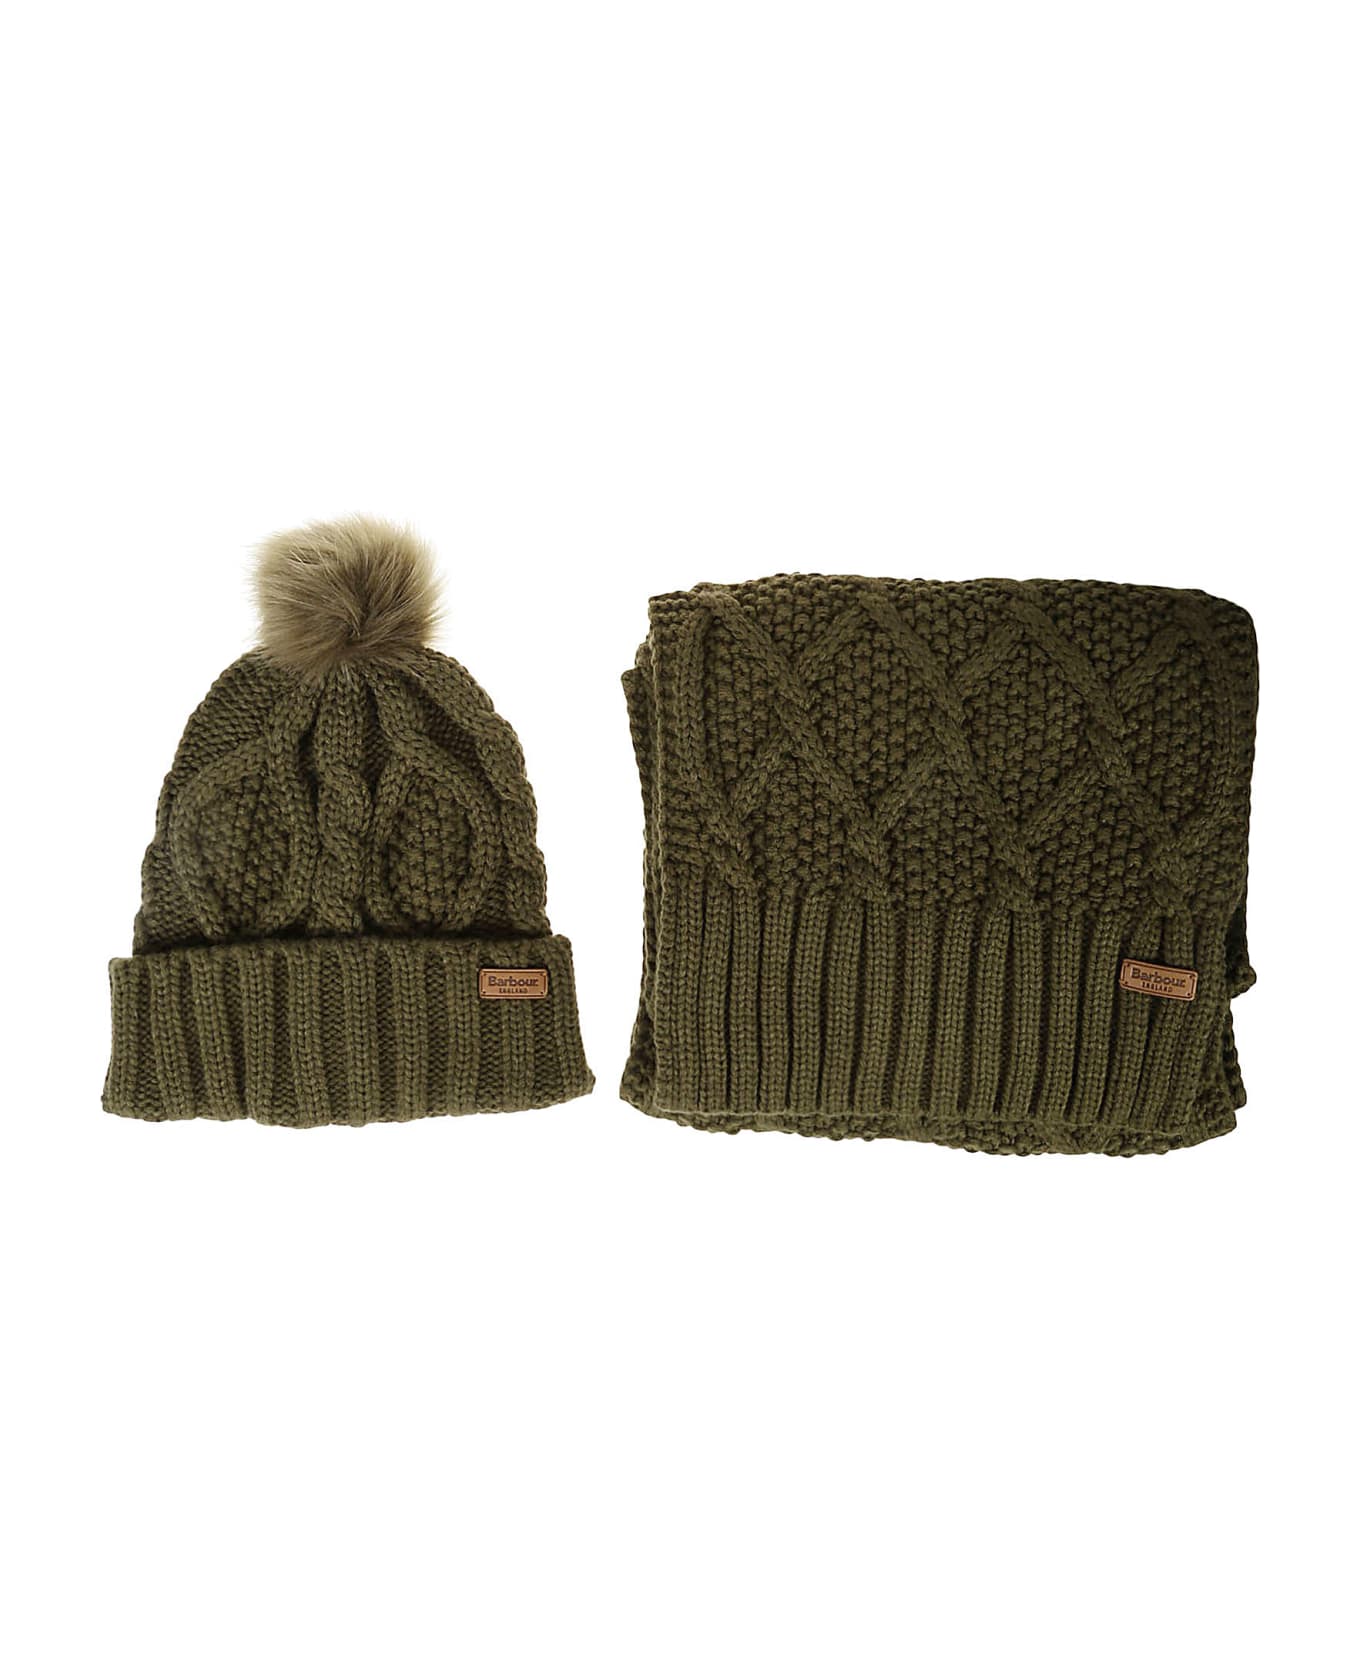 Barbour Ridley Beanie Scarf Gift Set - Olive